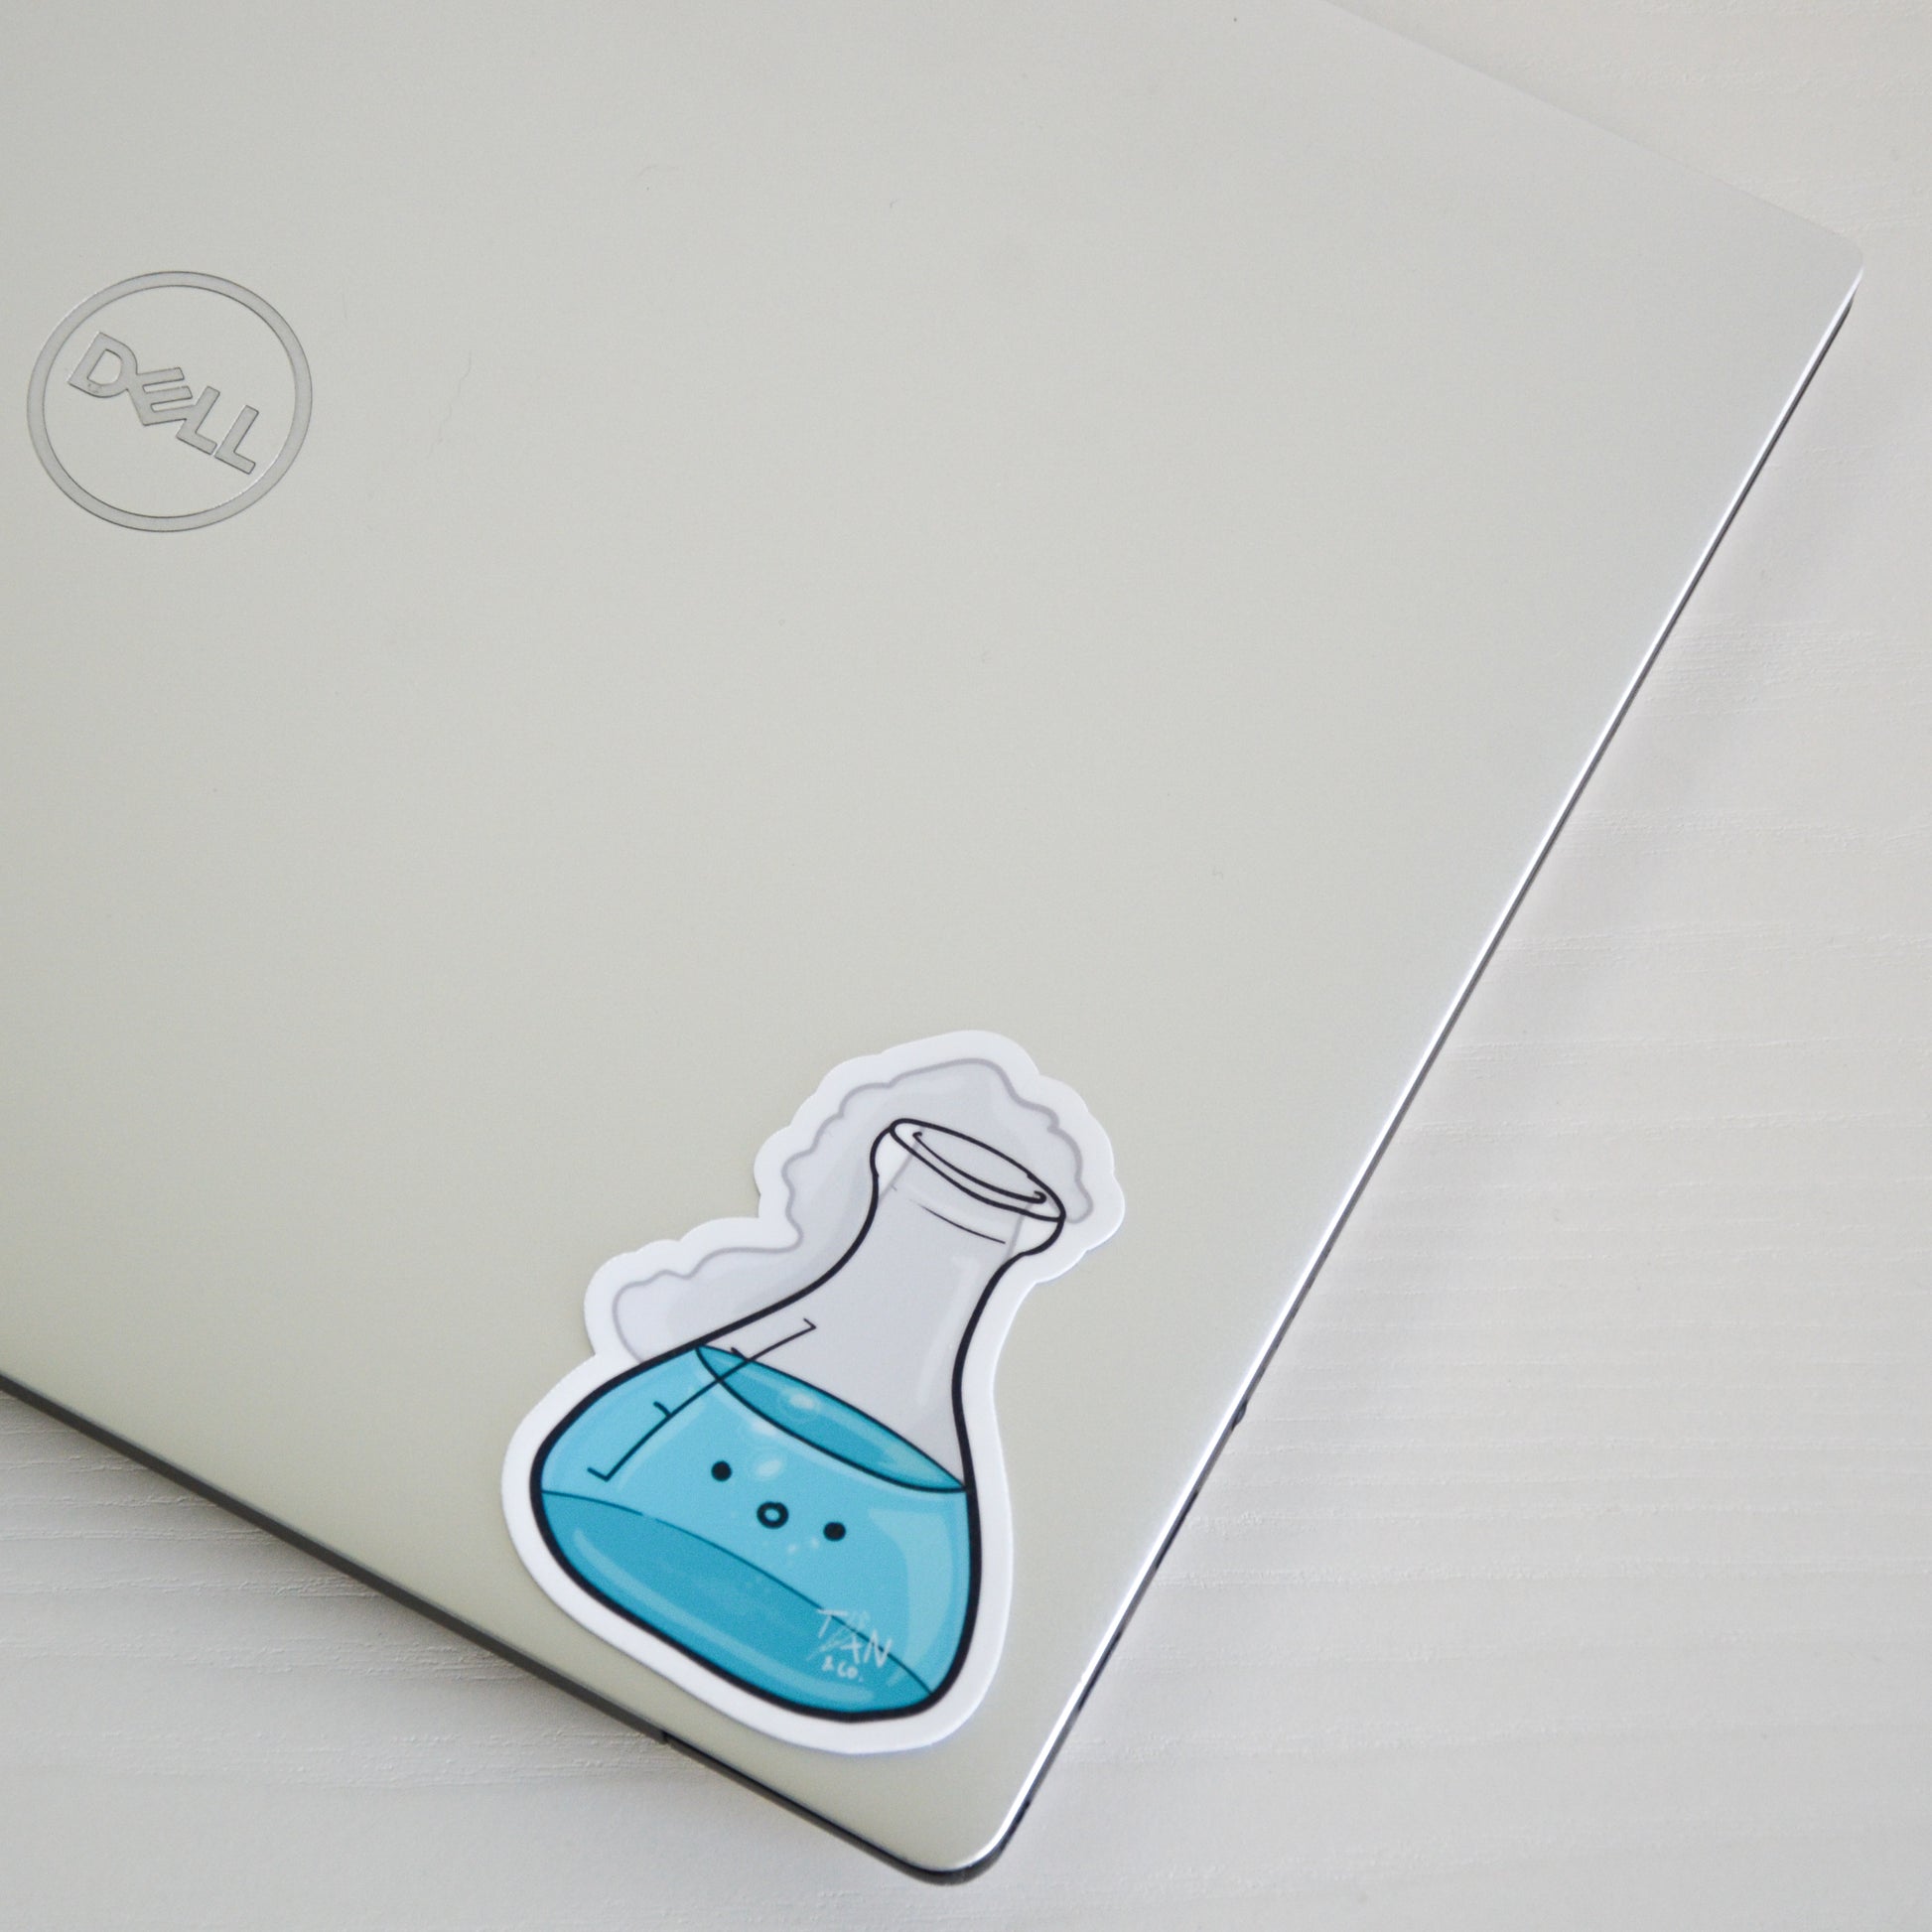 Teal conical flask on laptop